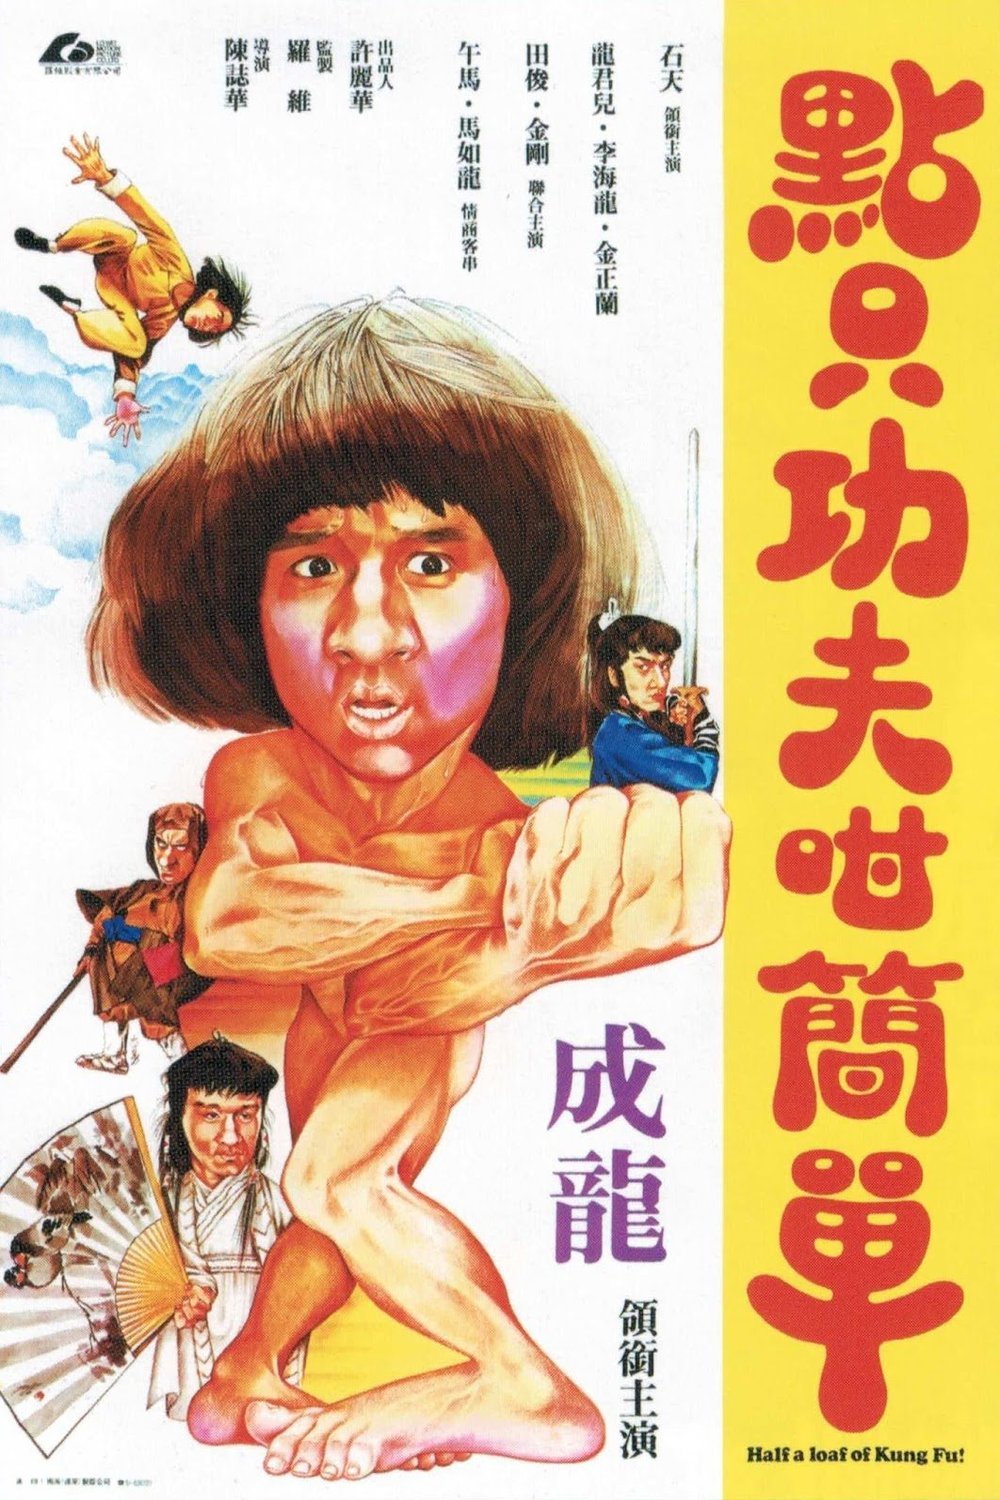 Mandarin poster of the movie Half a Loaf of Kung Fu